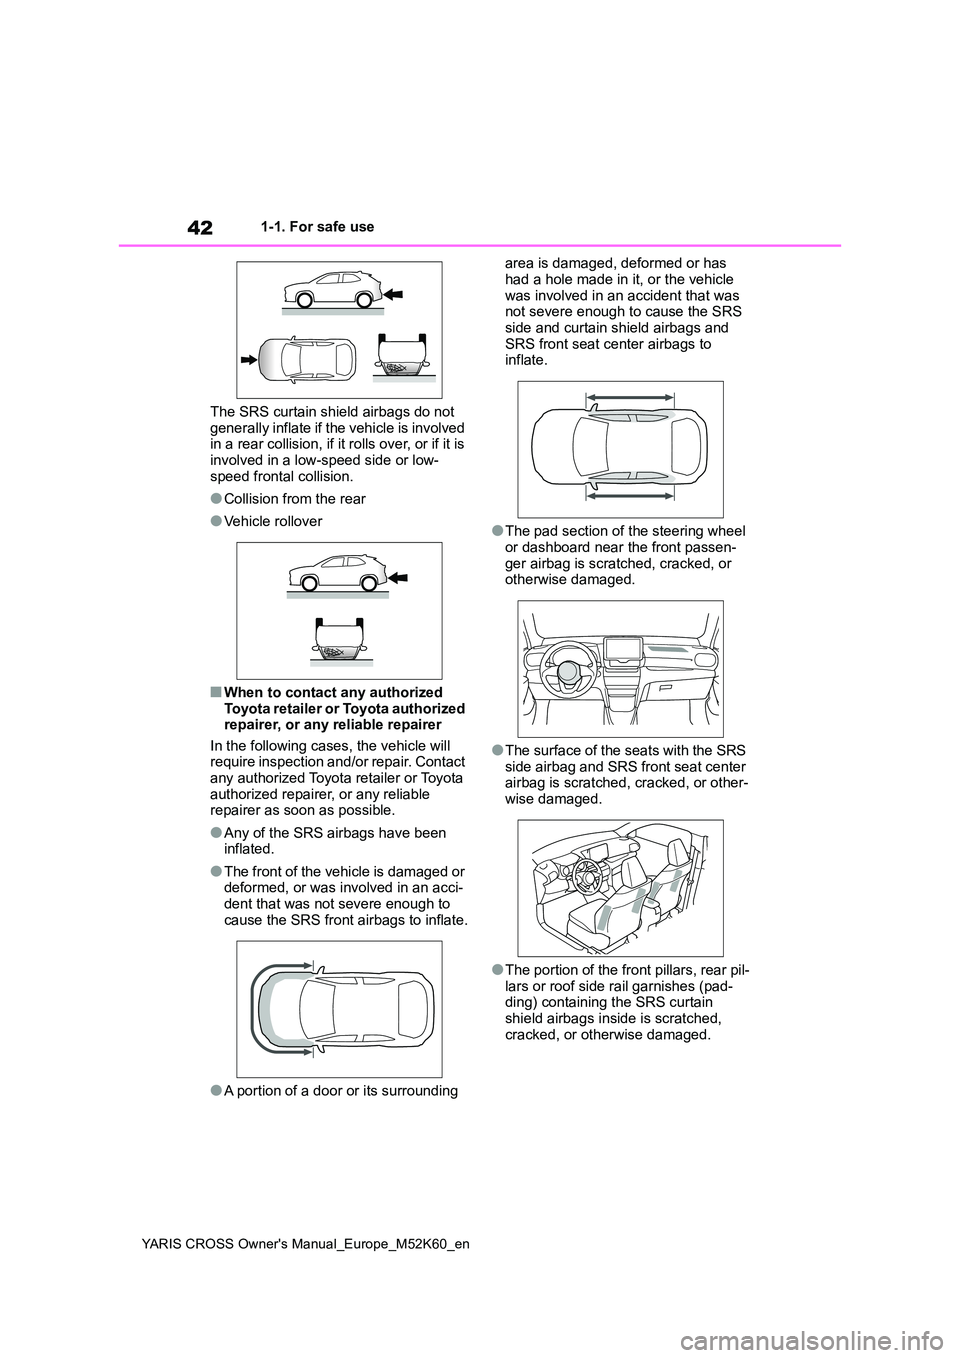 TOYOTA YARIS CROSS 2021  Owners Manual 42
YARIS CROSS Owner's Manual_Europe_M52K60_en
1-1. For safe use 
The SRS curtain shield airbags do not  
generally inflate if the vehicle is involved  in a rear collision, if it rolls over, or if